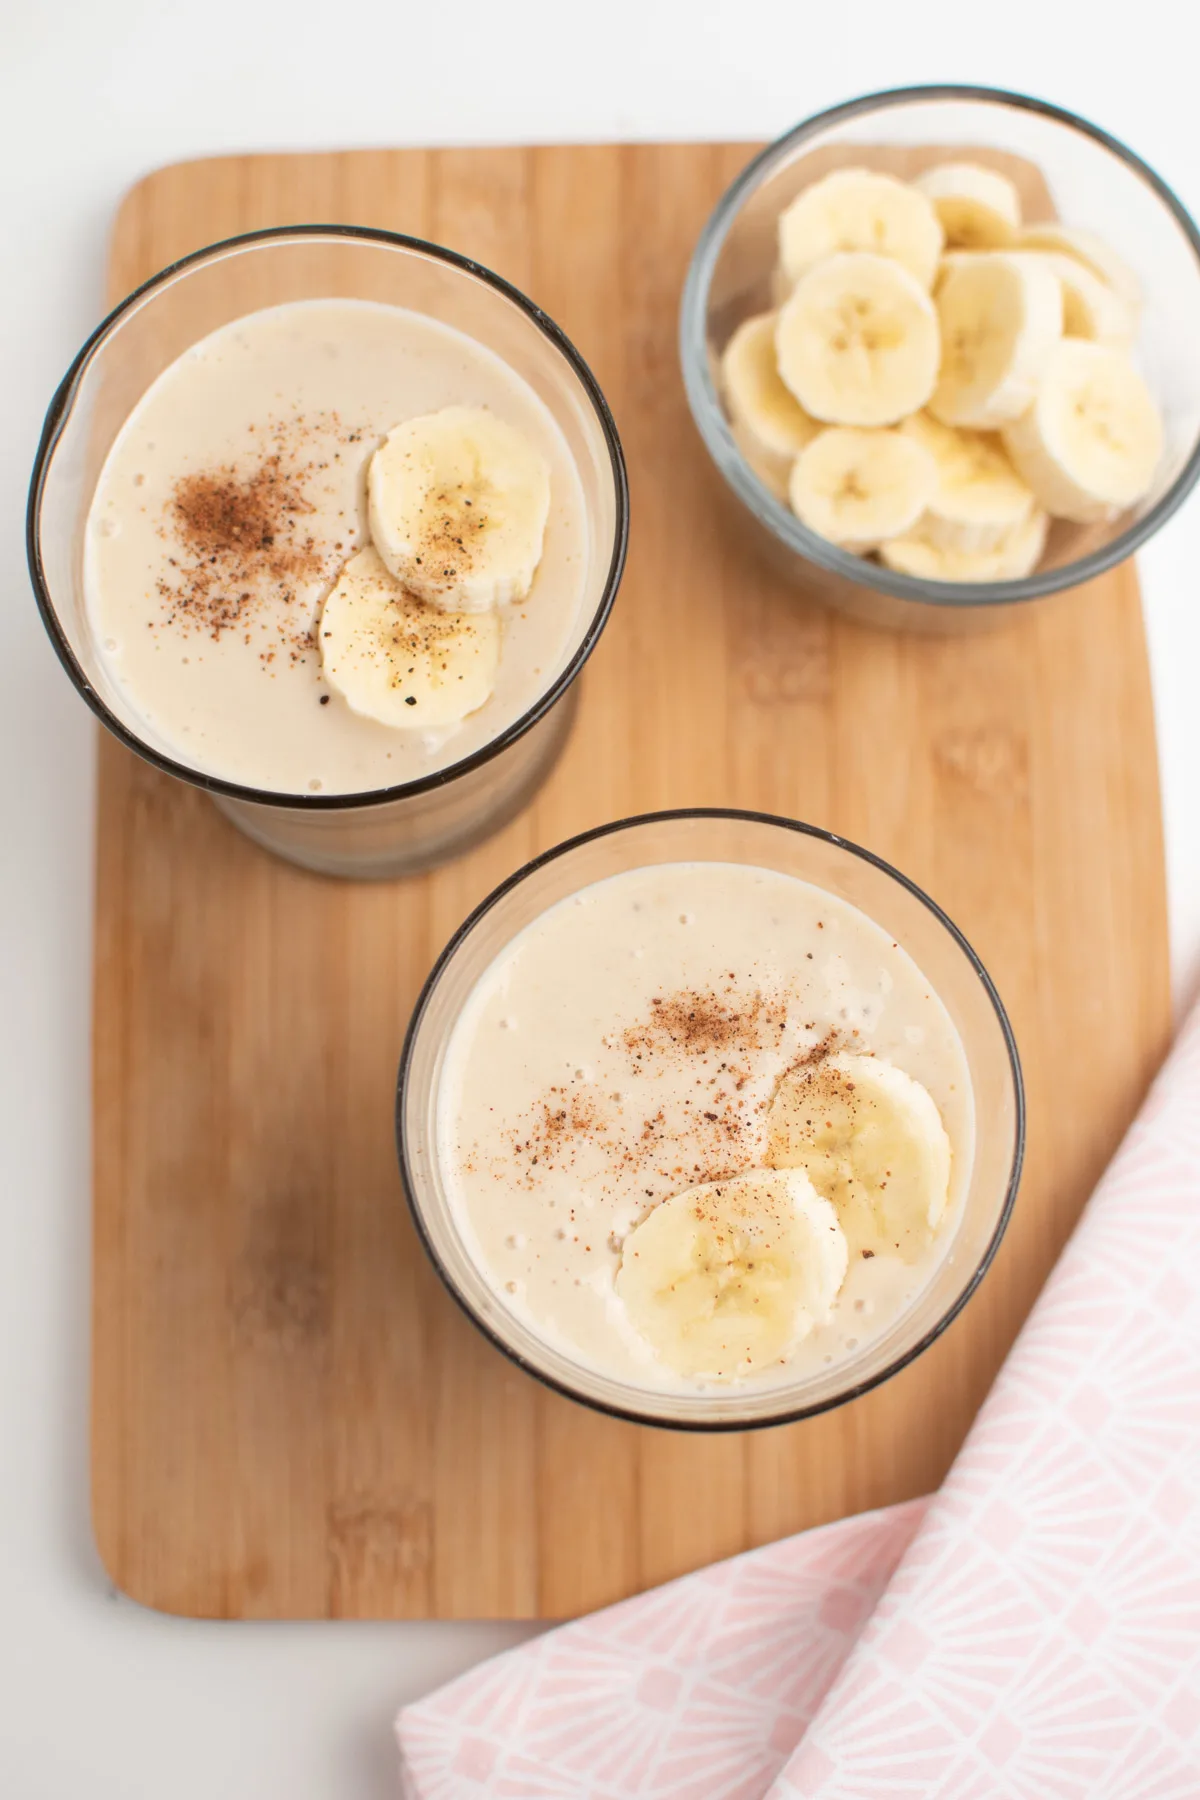 Two glasses of banana smoothie with nutmeg and banana slices on top next to glass of sliced banana.